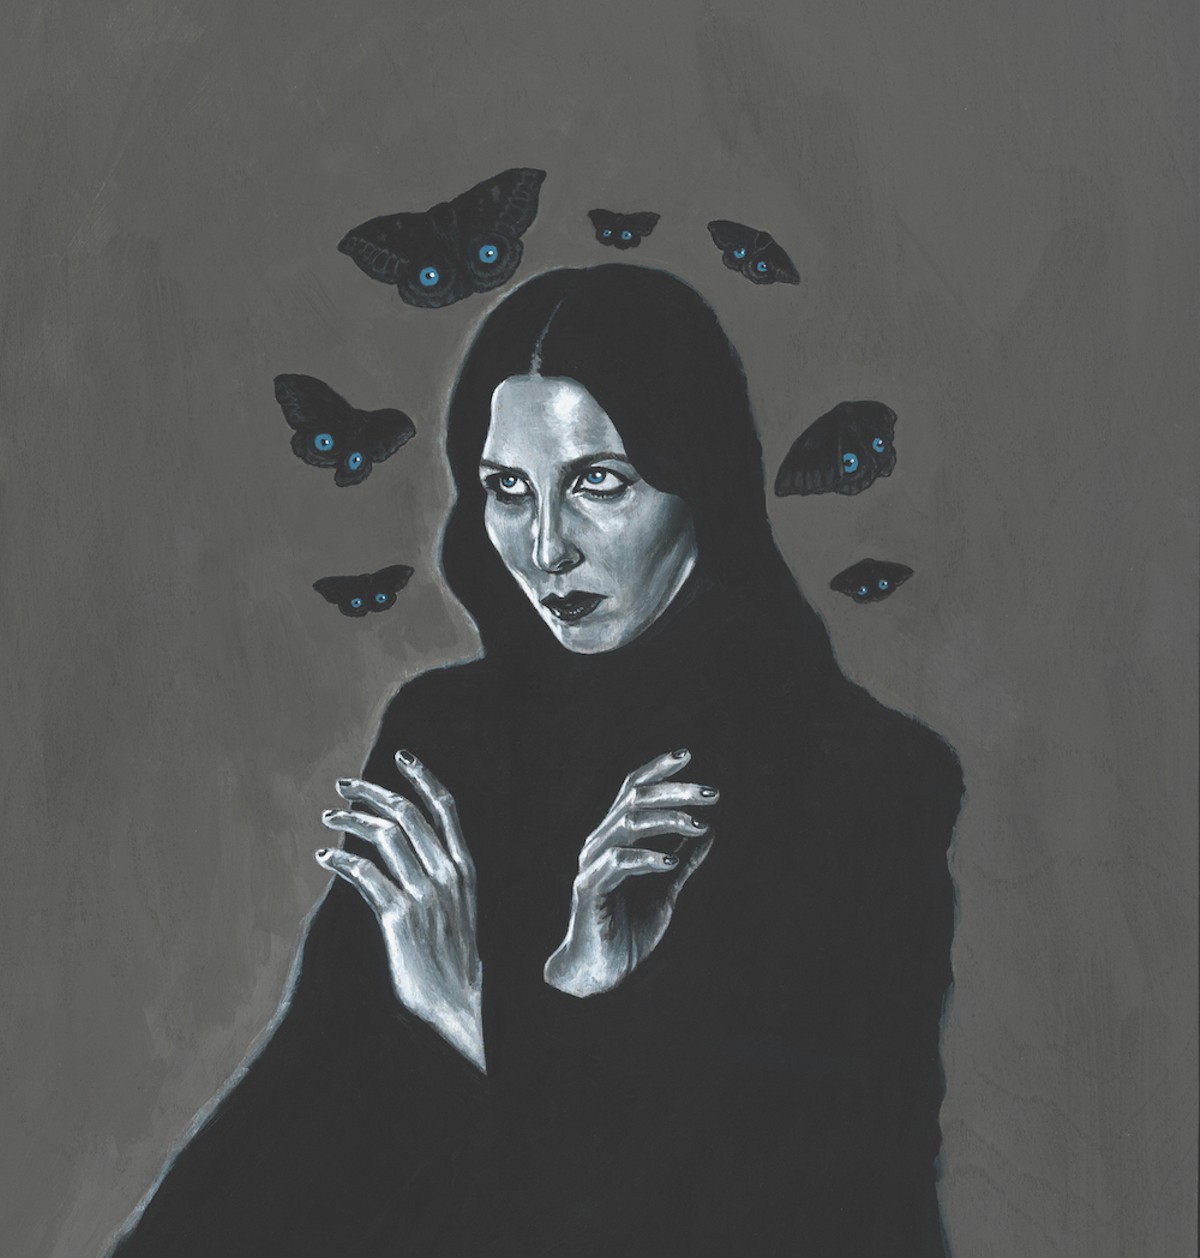 Let Chelsea Wolfe sing you into the abyss